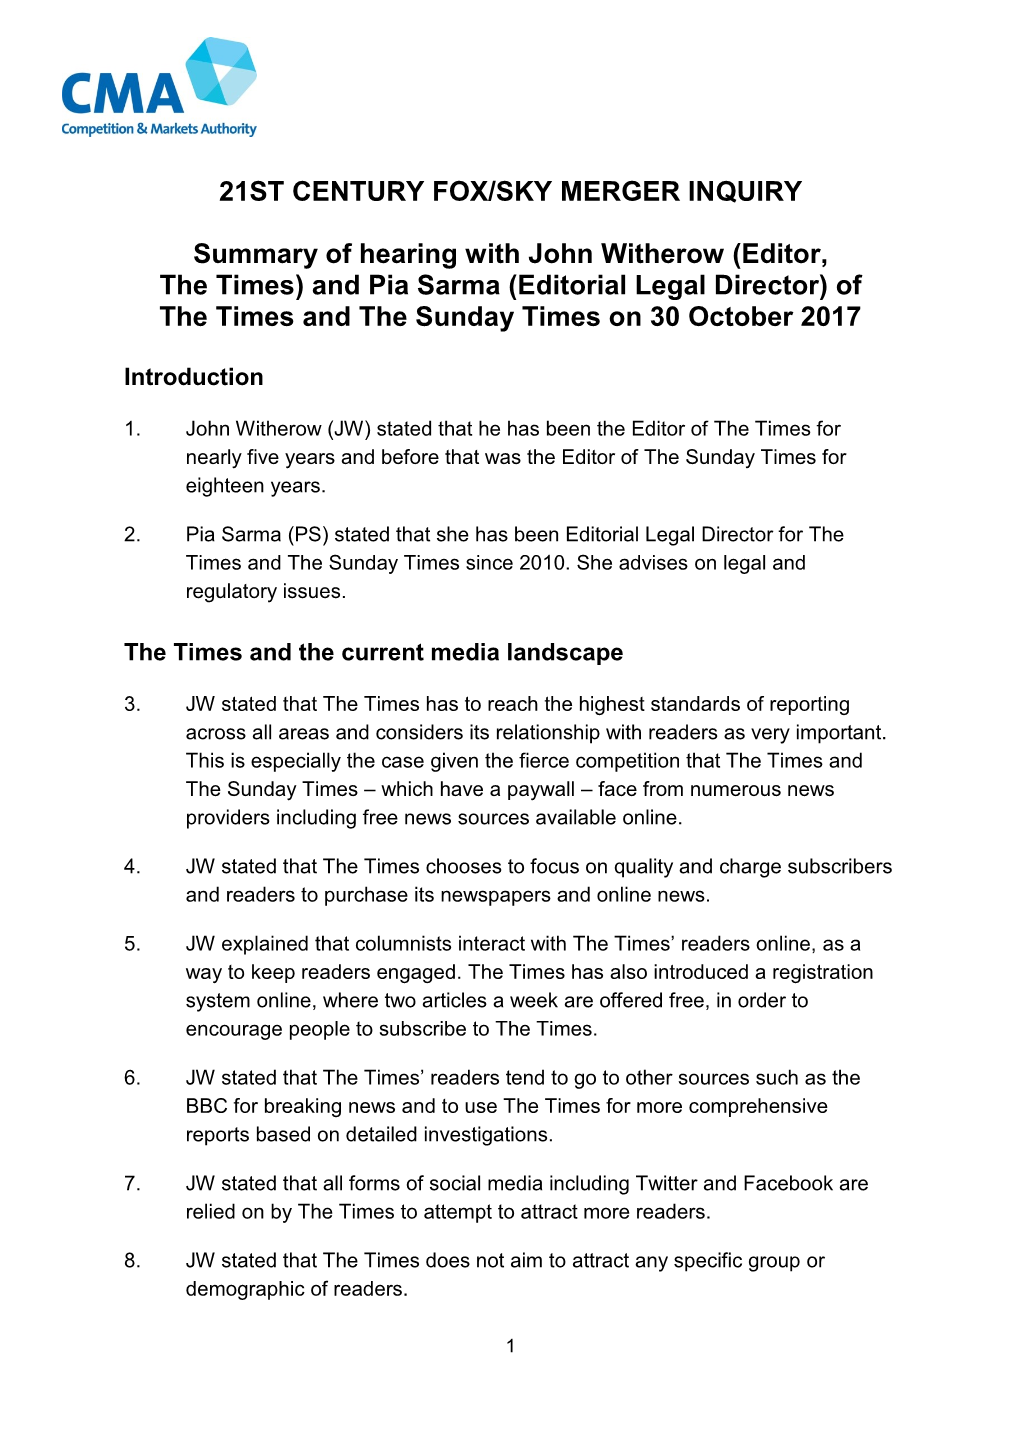 The-Times-Hearing-Summary.Pdf